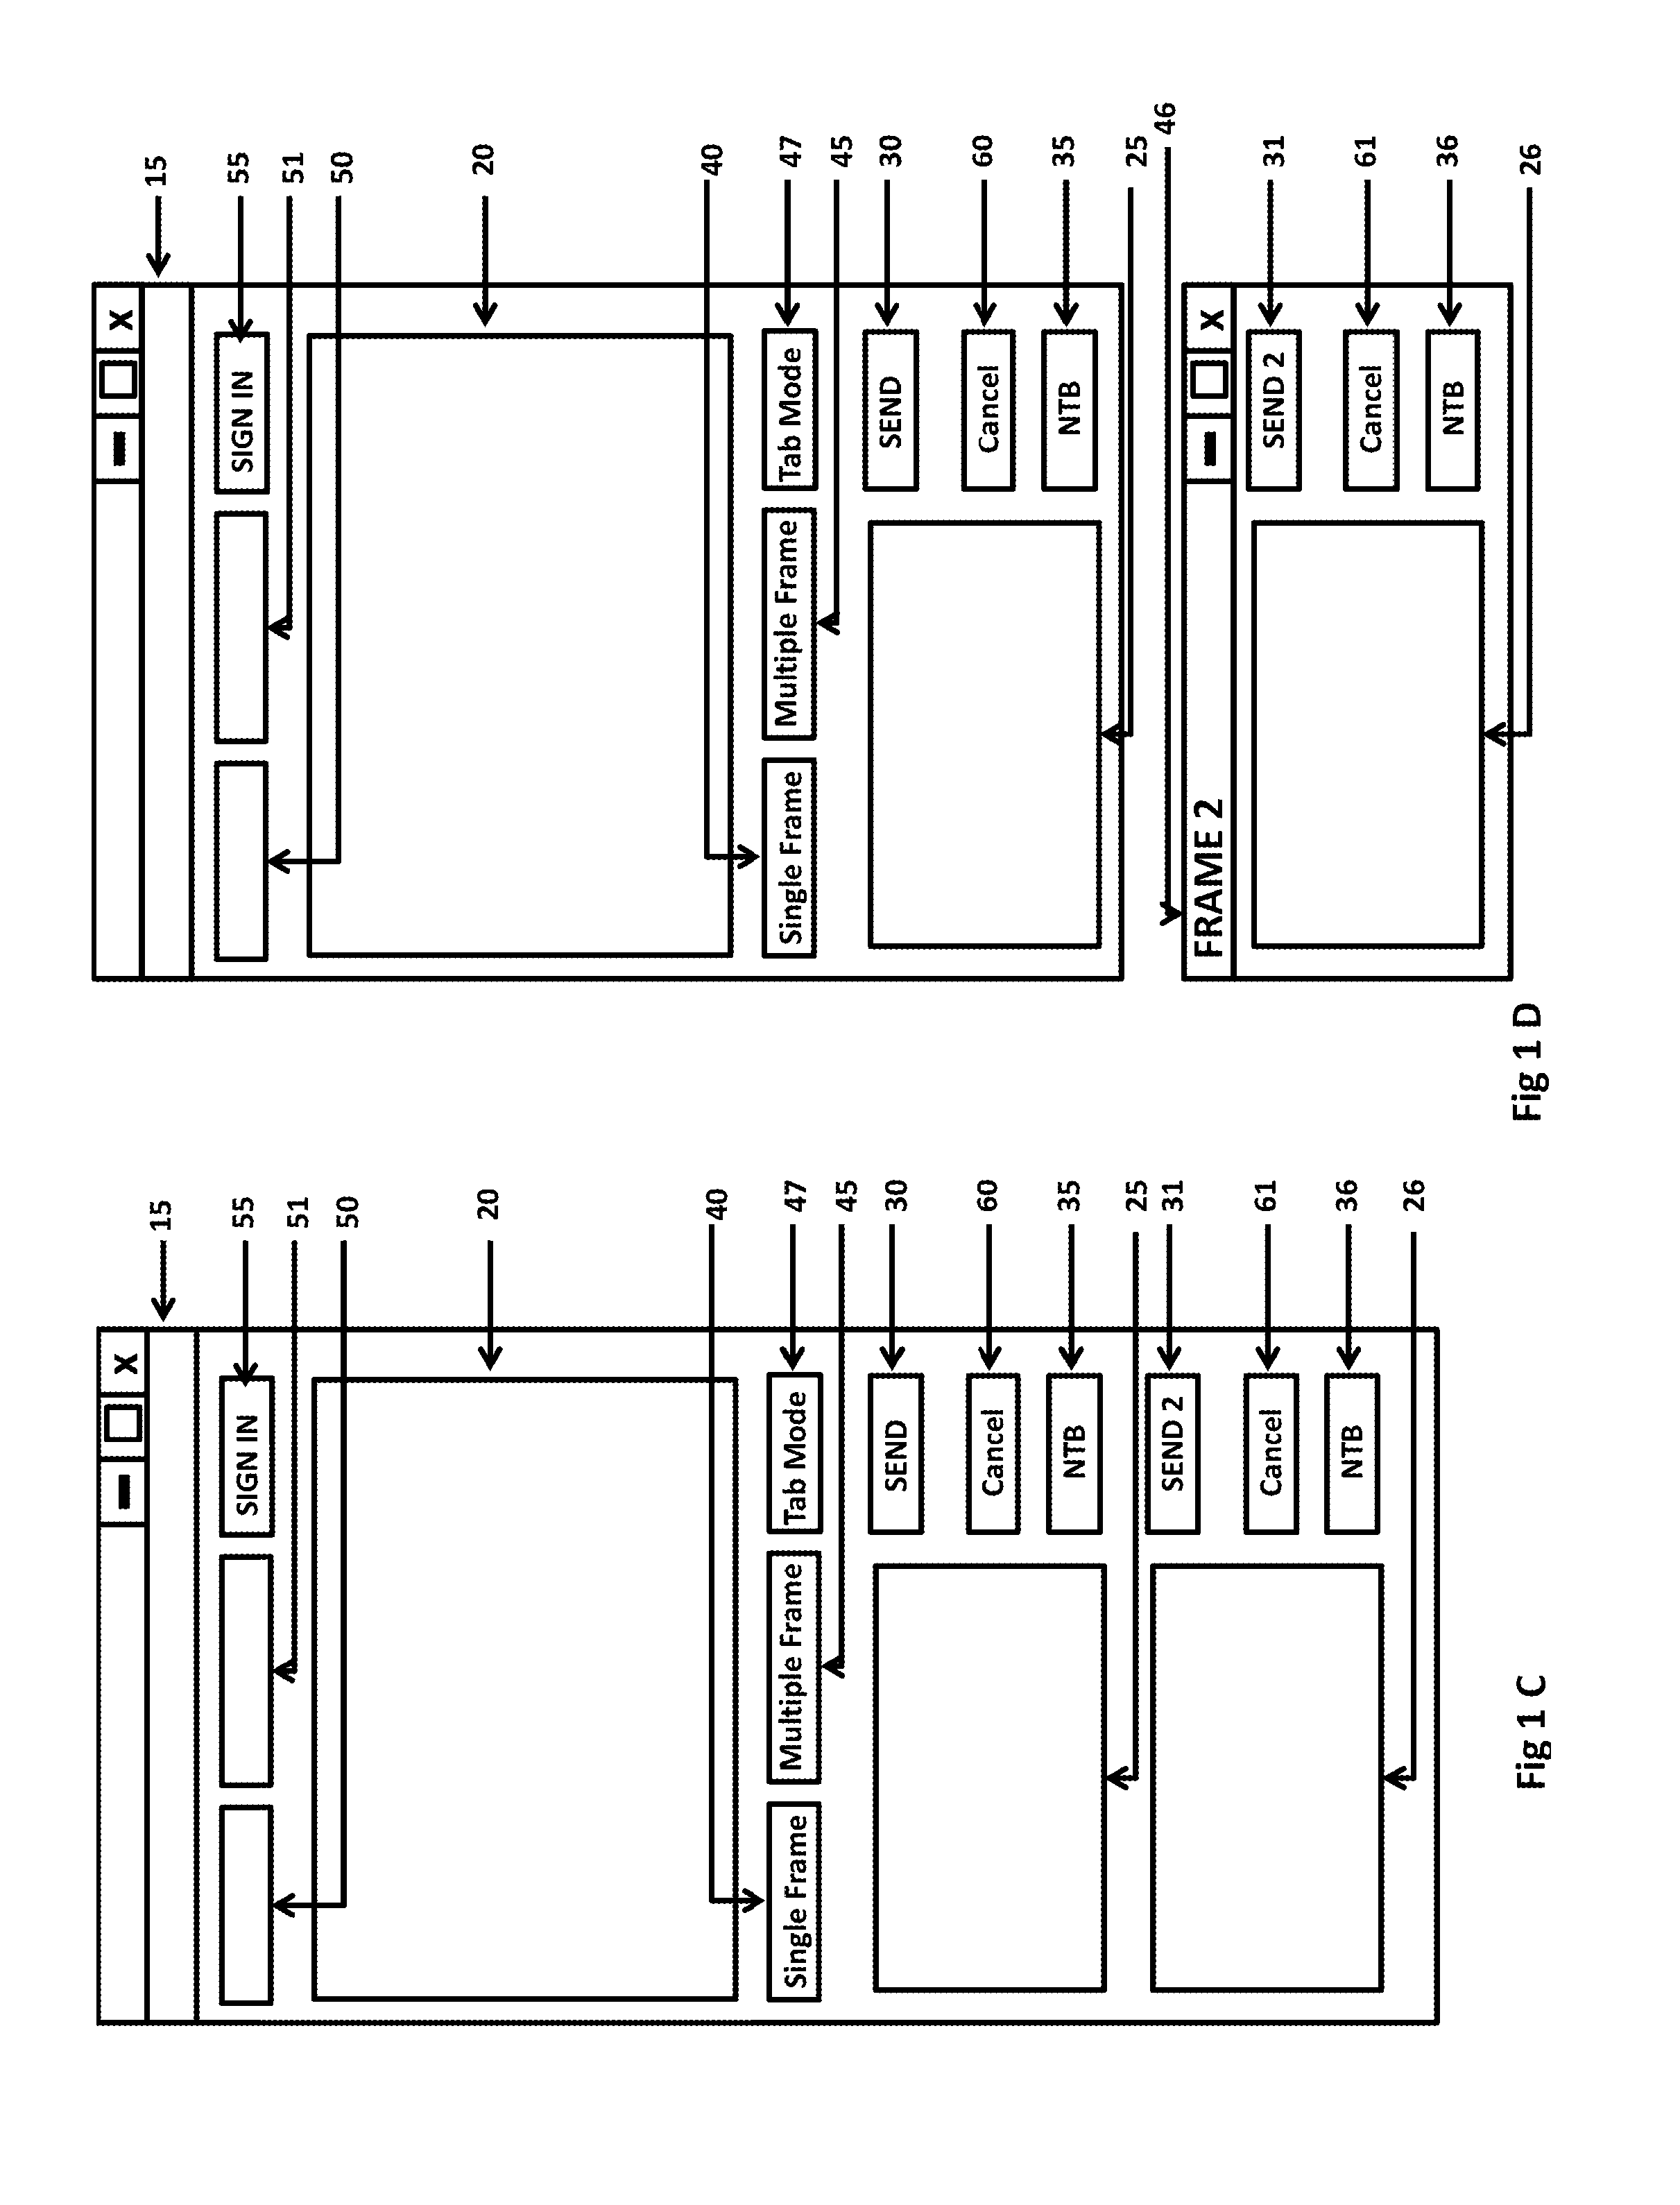 Method, System and Computer Program Product for Messaging Over a Network